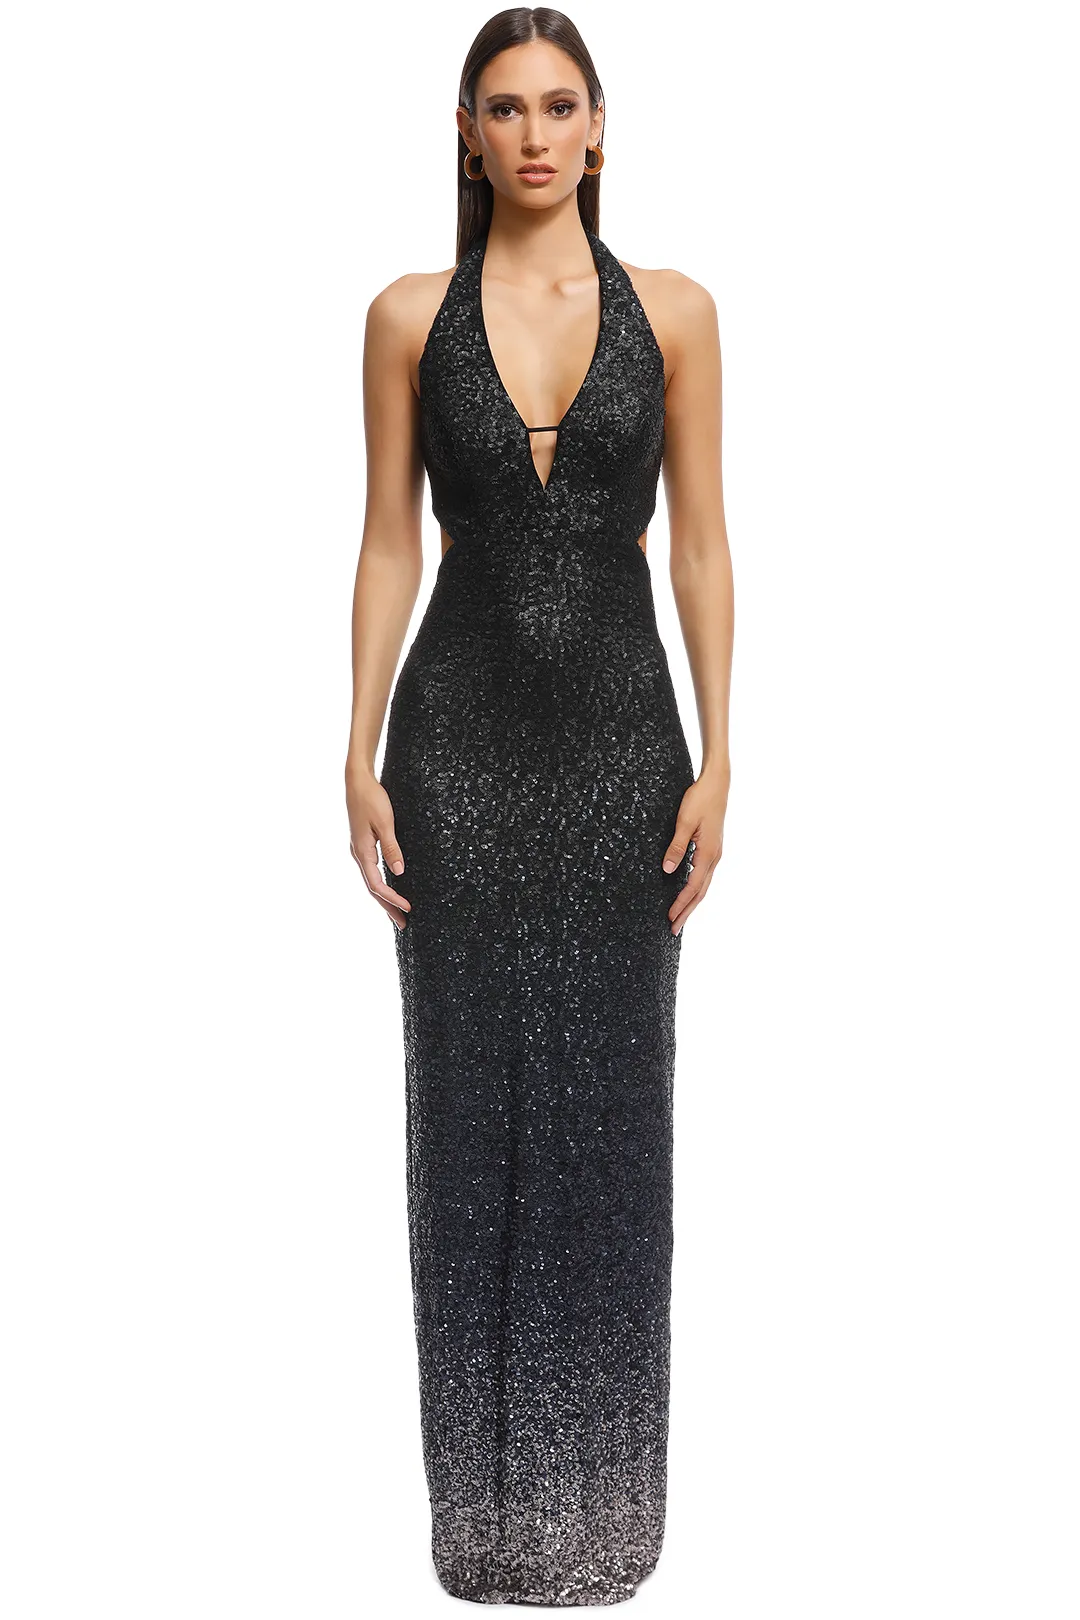 Ombre Sequin Gown by ABS by Allen Schwartz for evening events